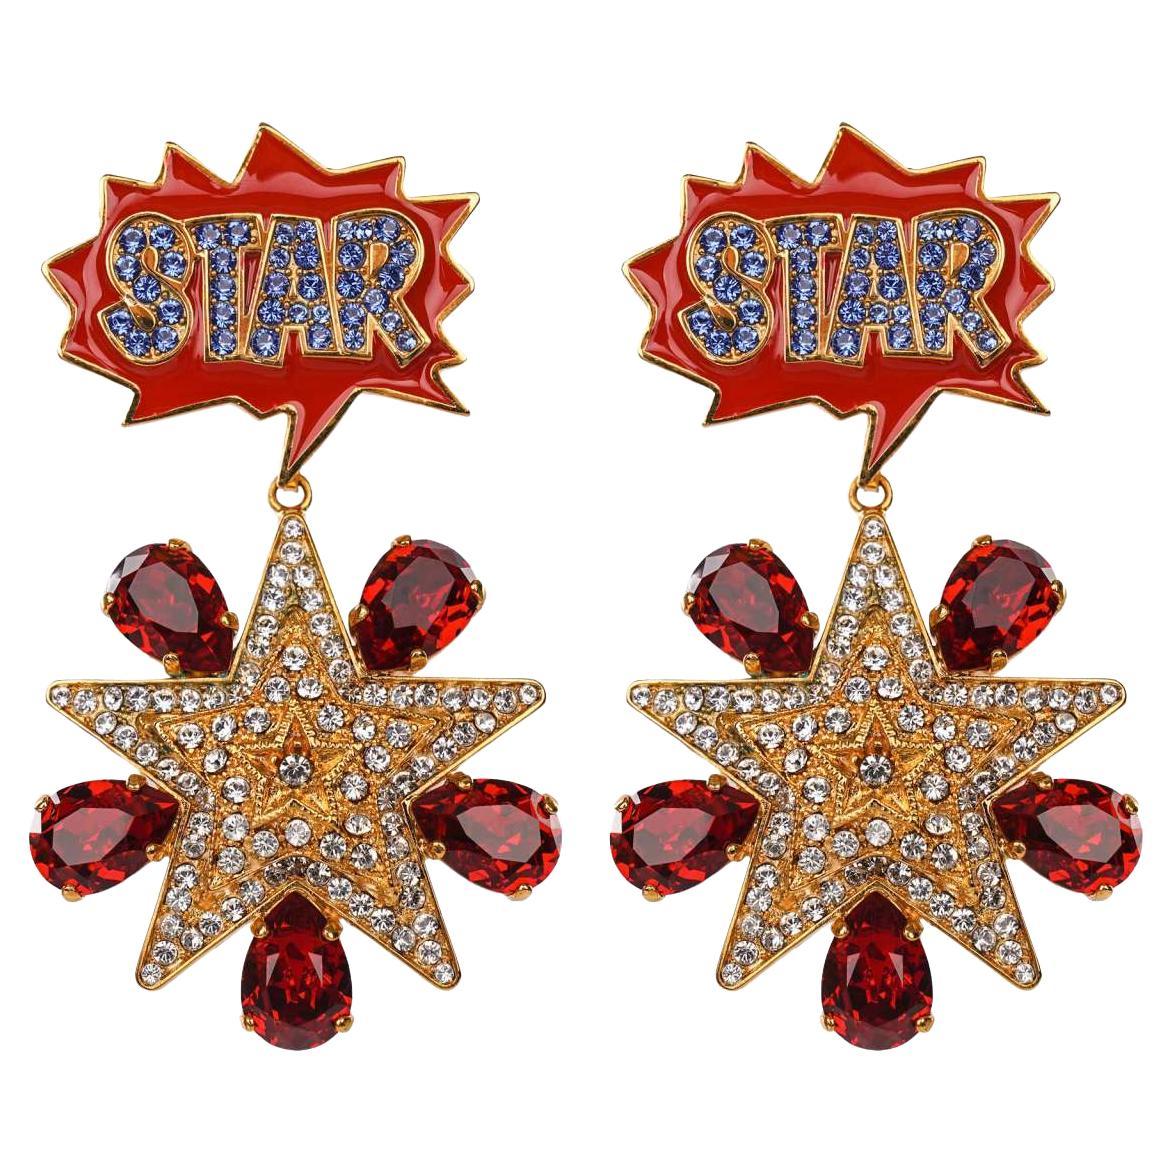 Dolce & Gabbana - Fumetti Cartoons Crystal Star Clip Earrings Gold Red Blue For Sale